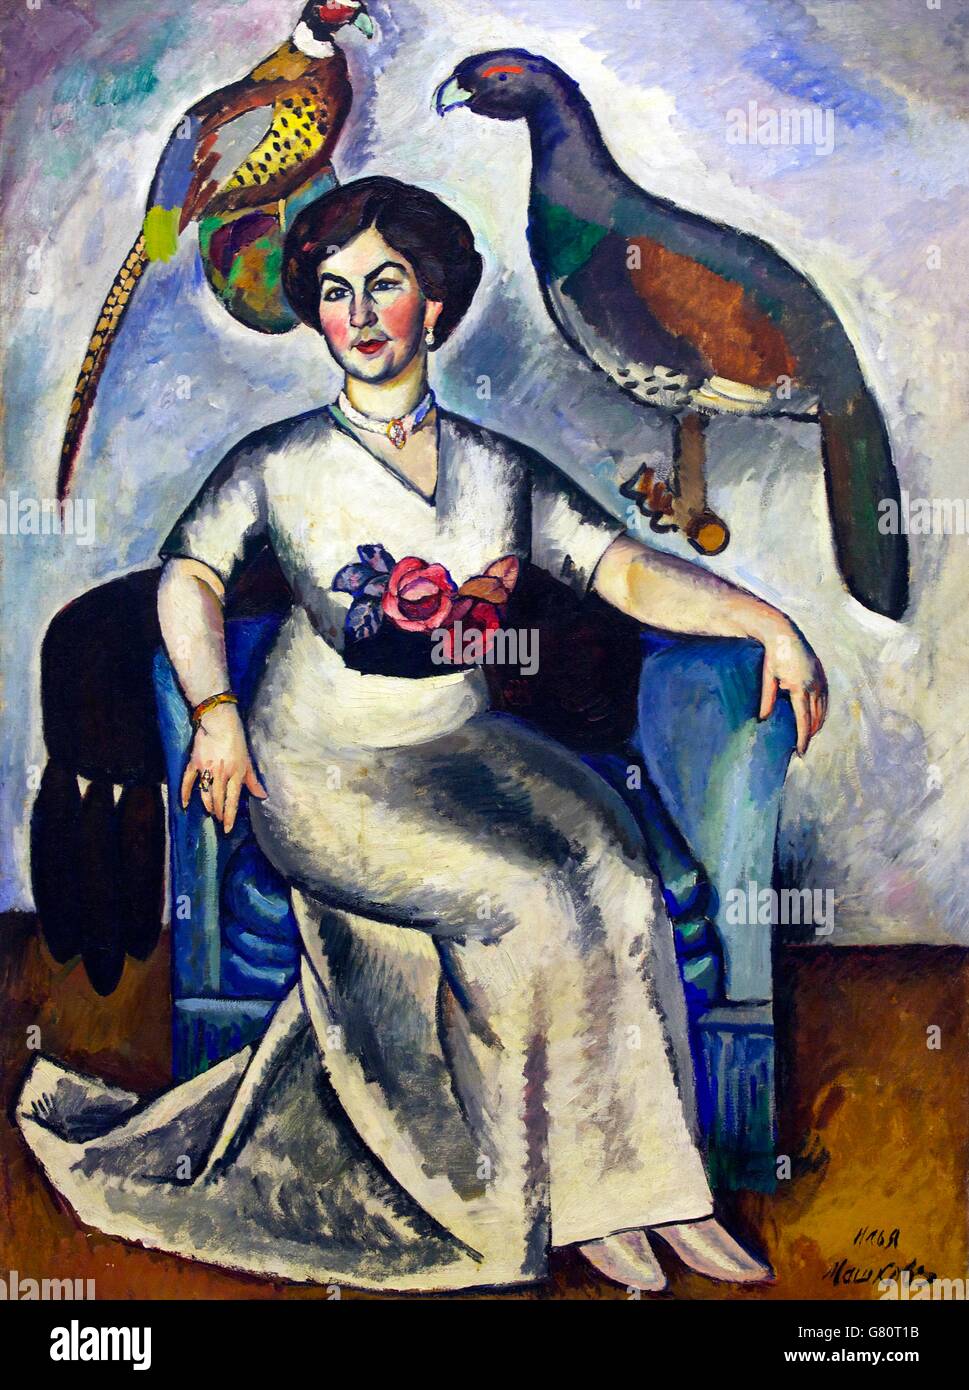 Portrait of a Lady with Pheasants, by Ilya Mashkov, 1911, State Russian Museum, Saint Petersburg, Russia Stock Photo